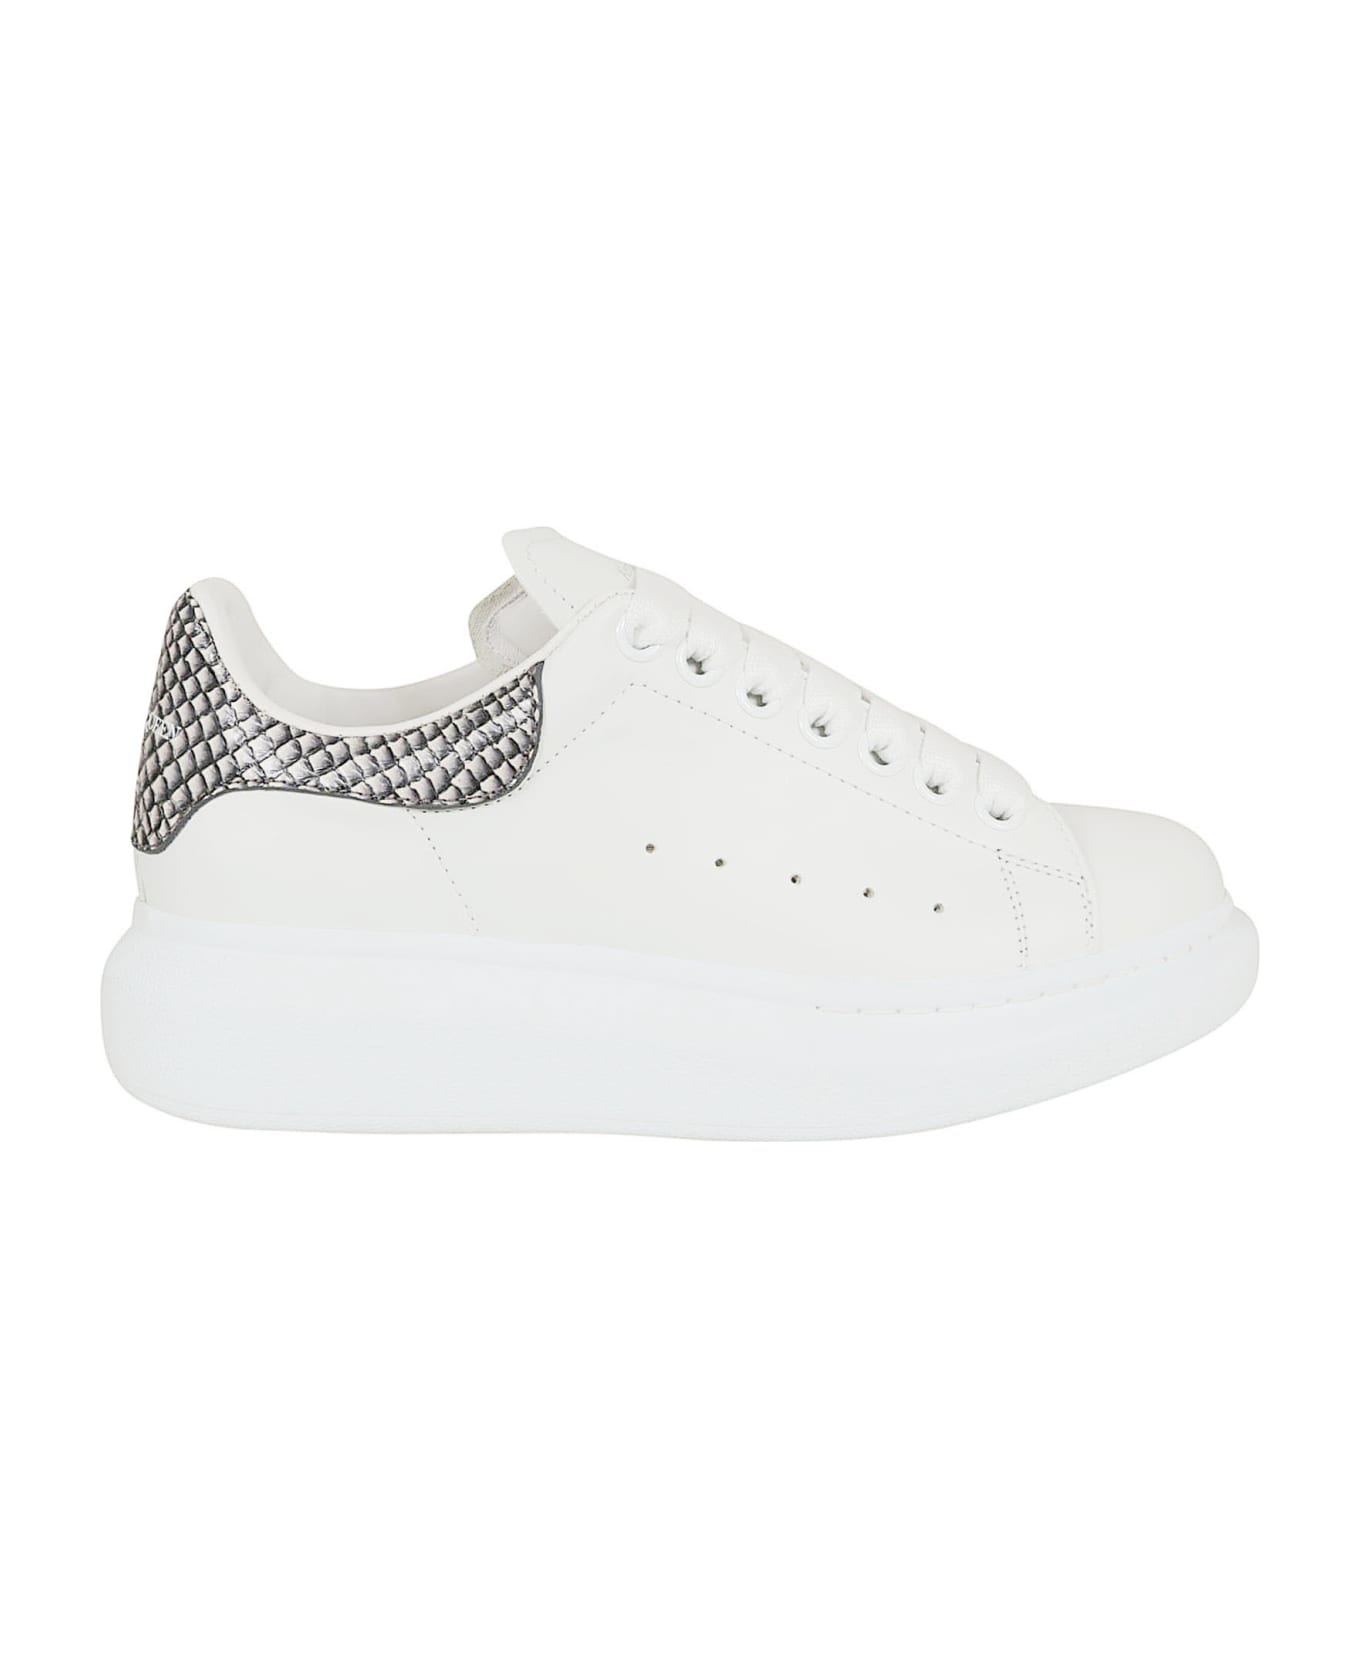 Alexander McQueen Chunky Sneakers With Platform In Leather - White Black スニーカー